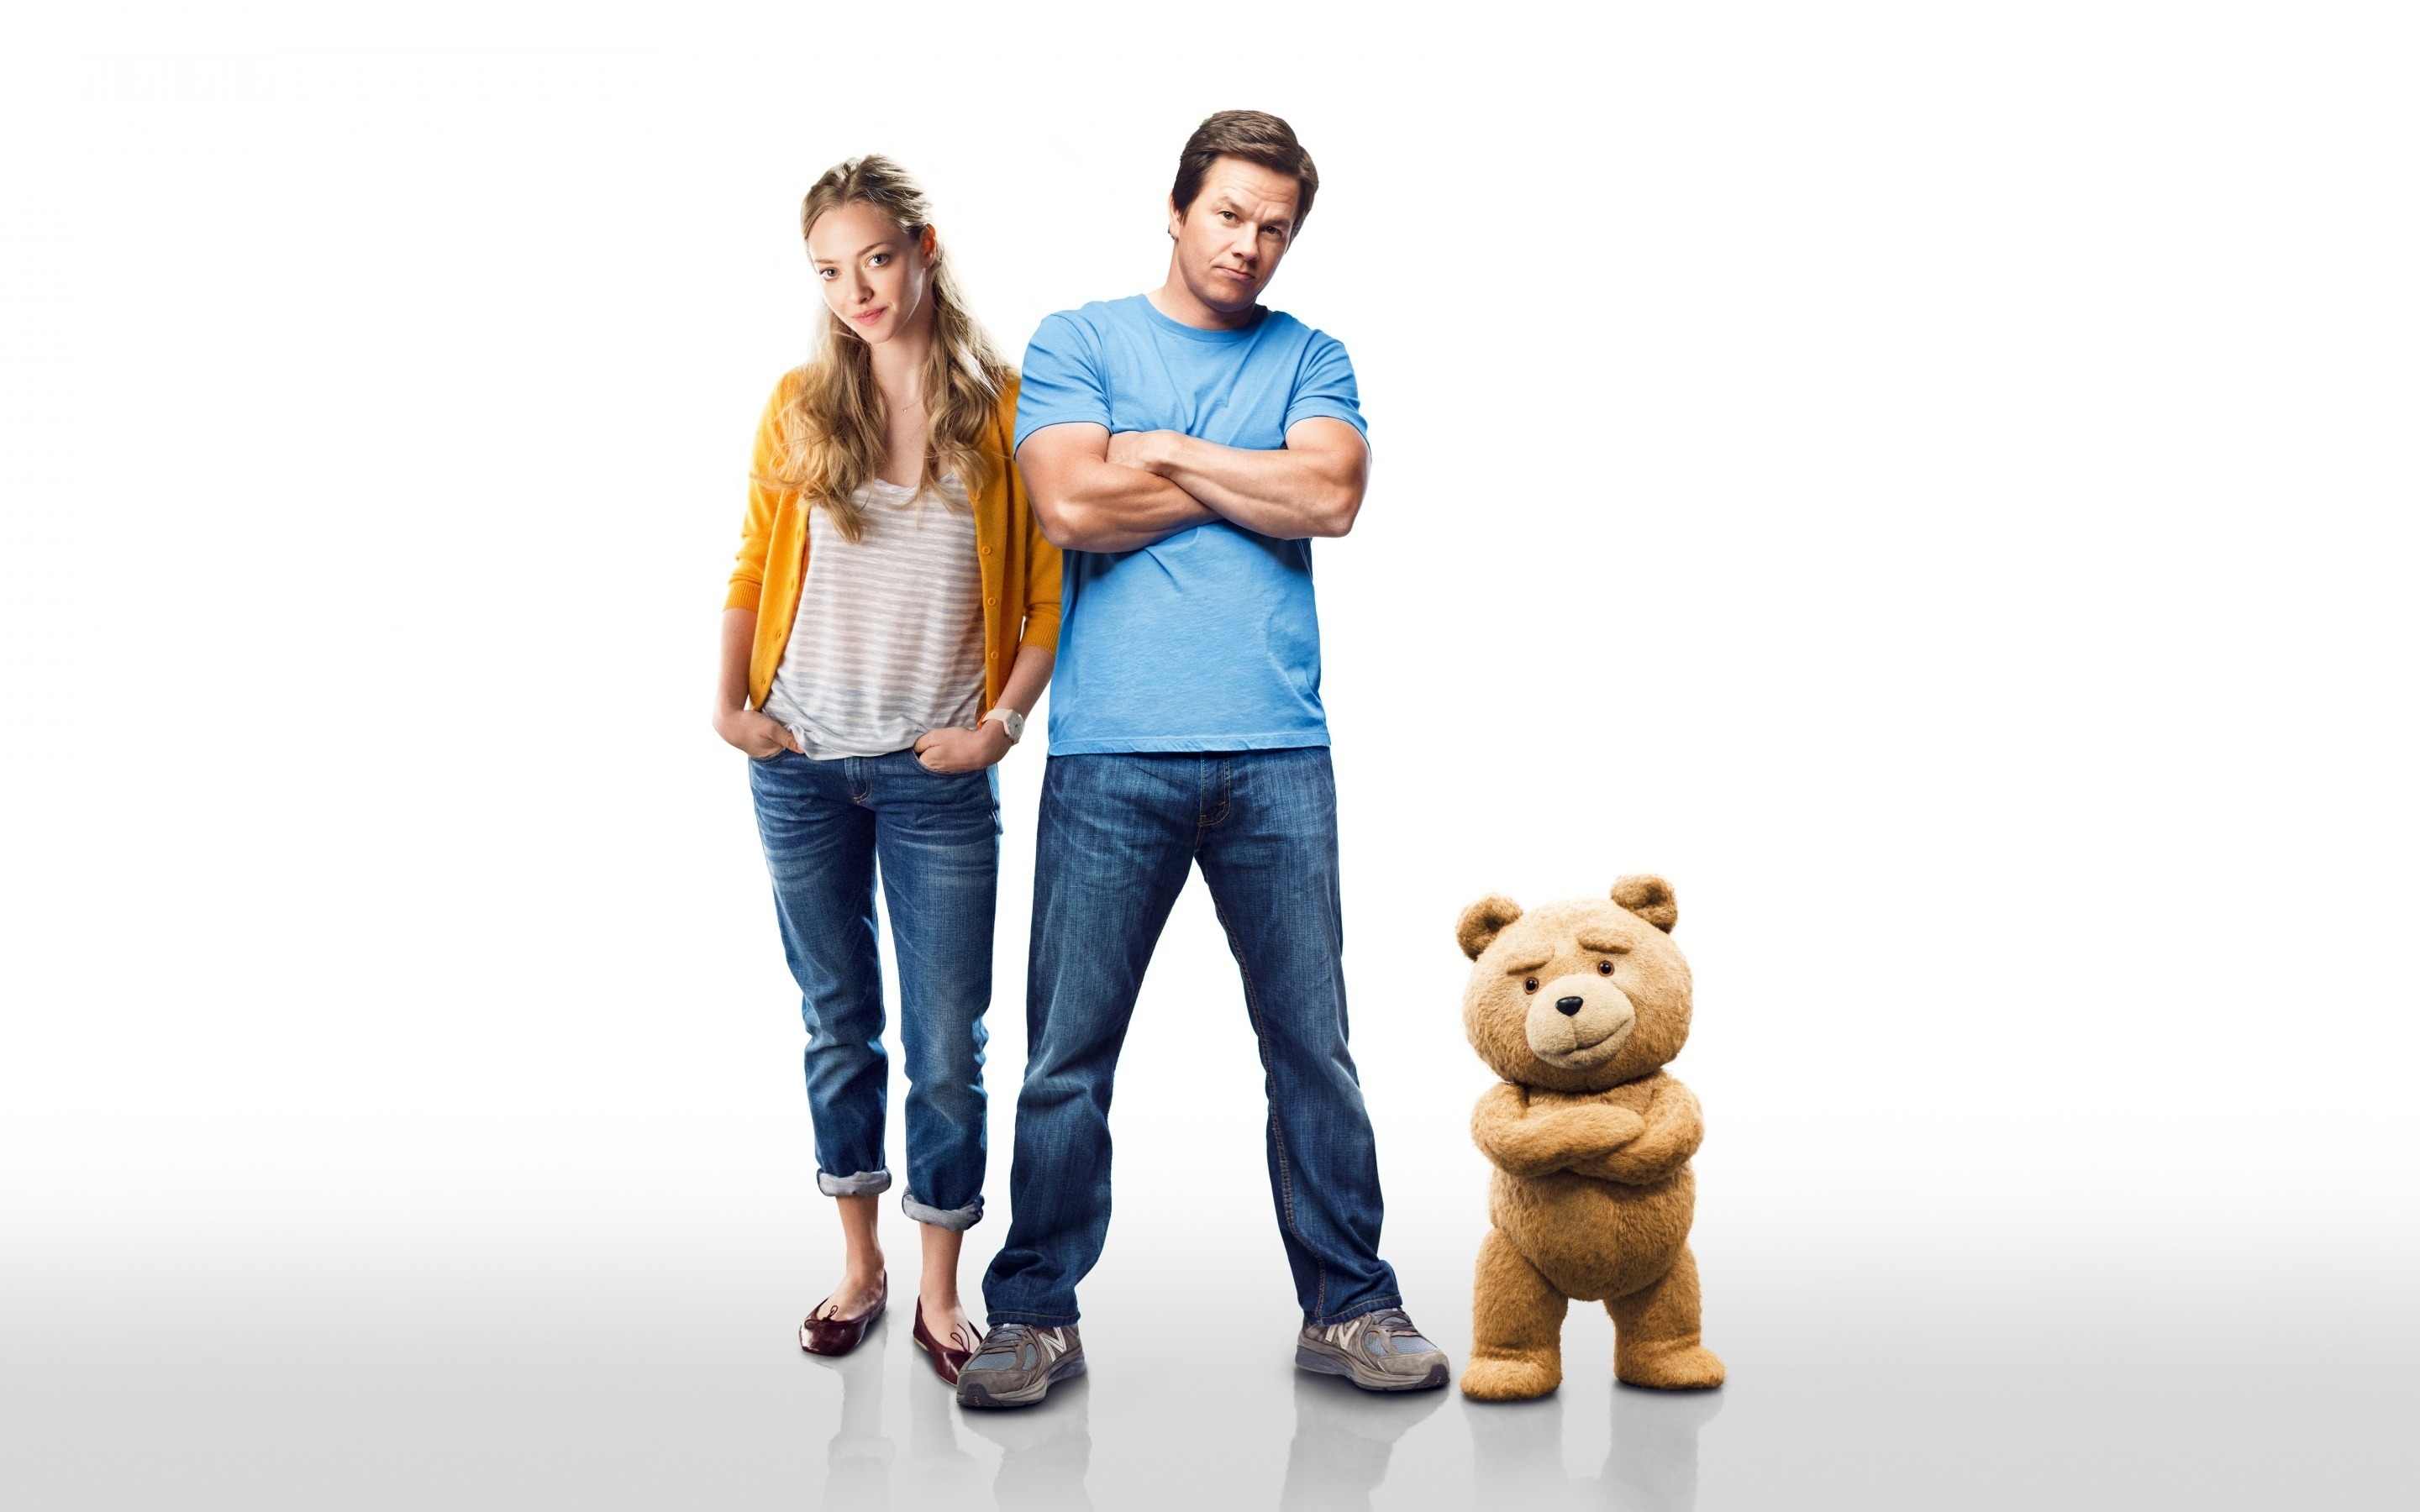 Ted 2 for 2880 x 1800 Retina Display resolution